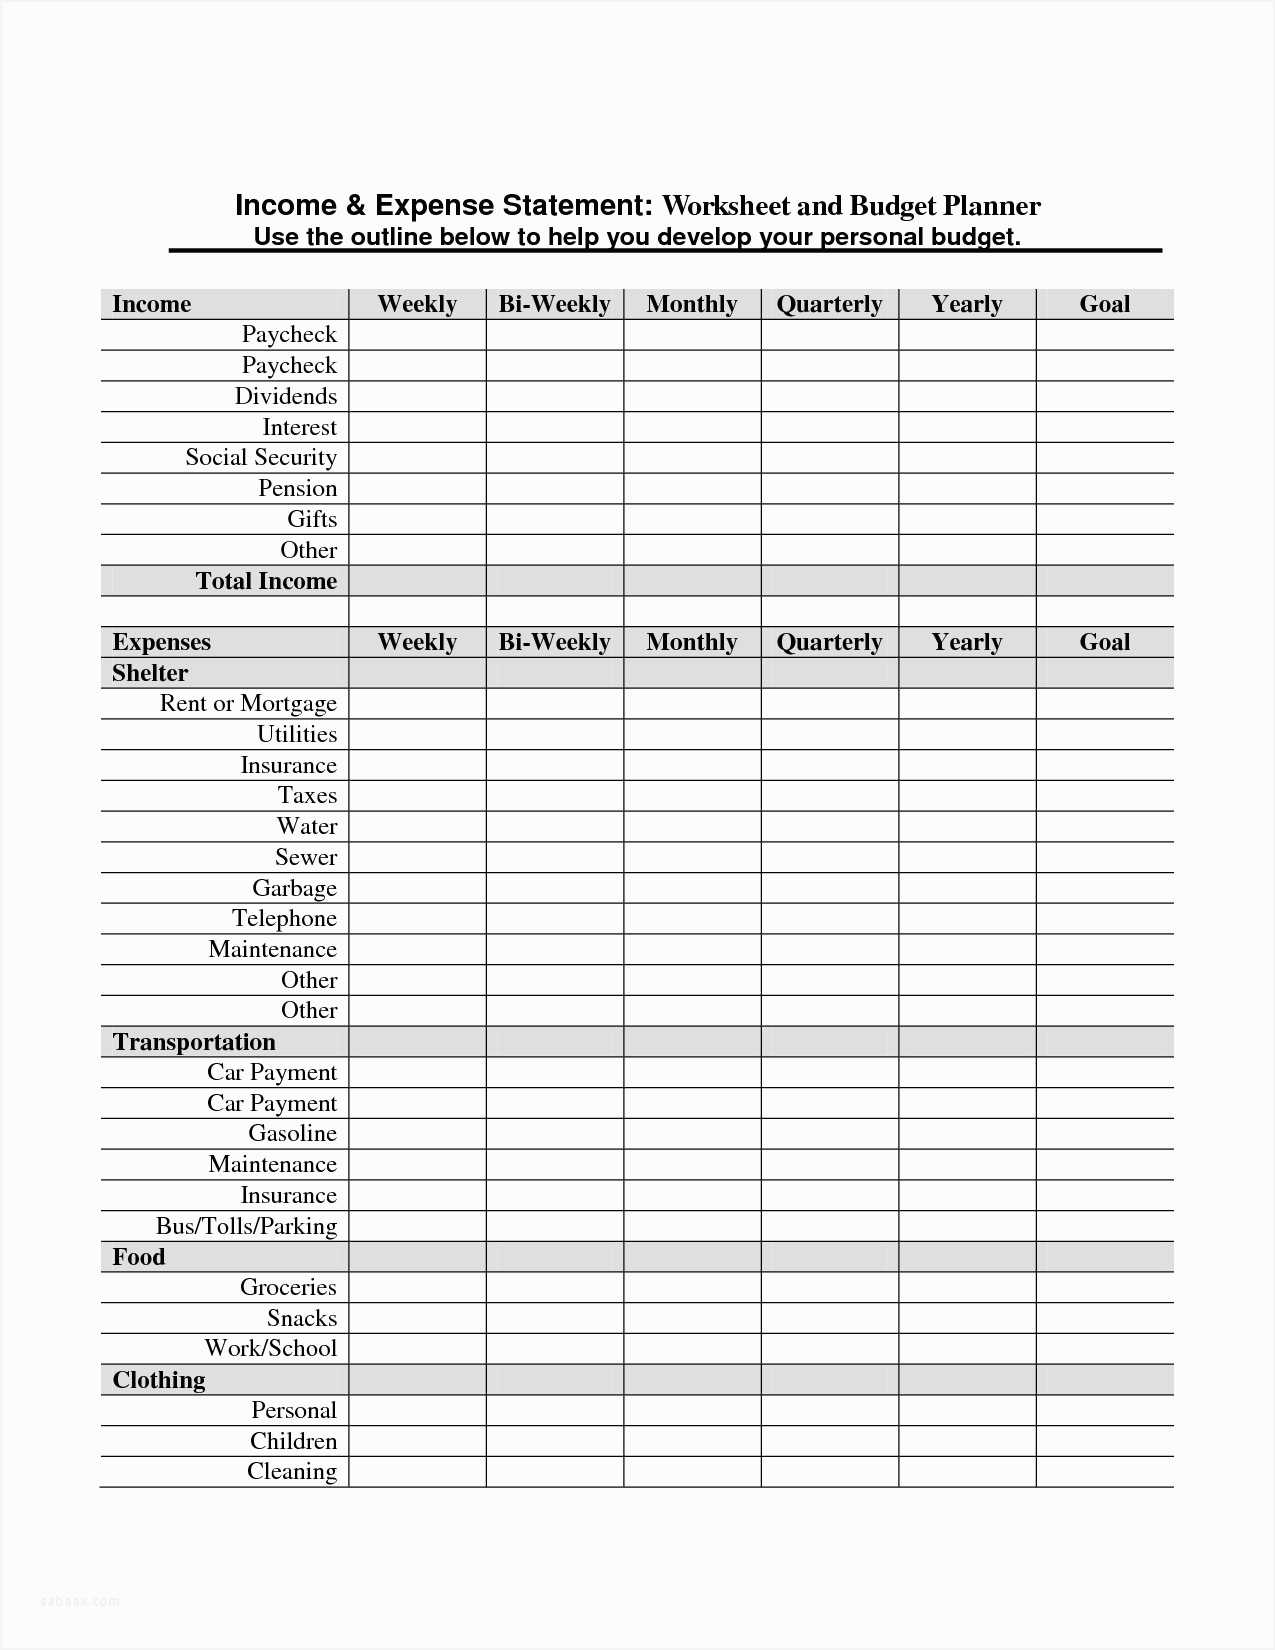 Taxation Worksheet Answers together with the Best Student Loan Interest Deduction Worksheet – Sabaax